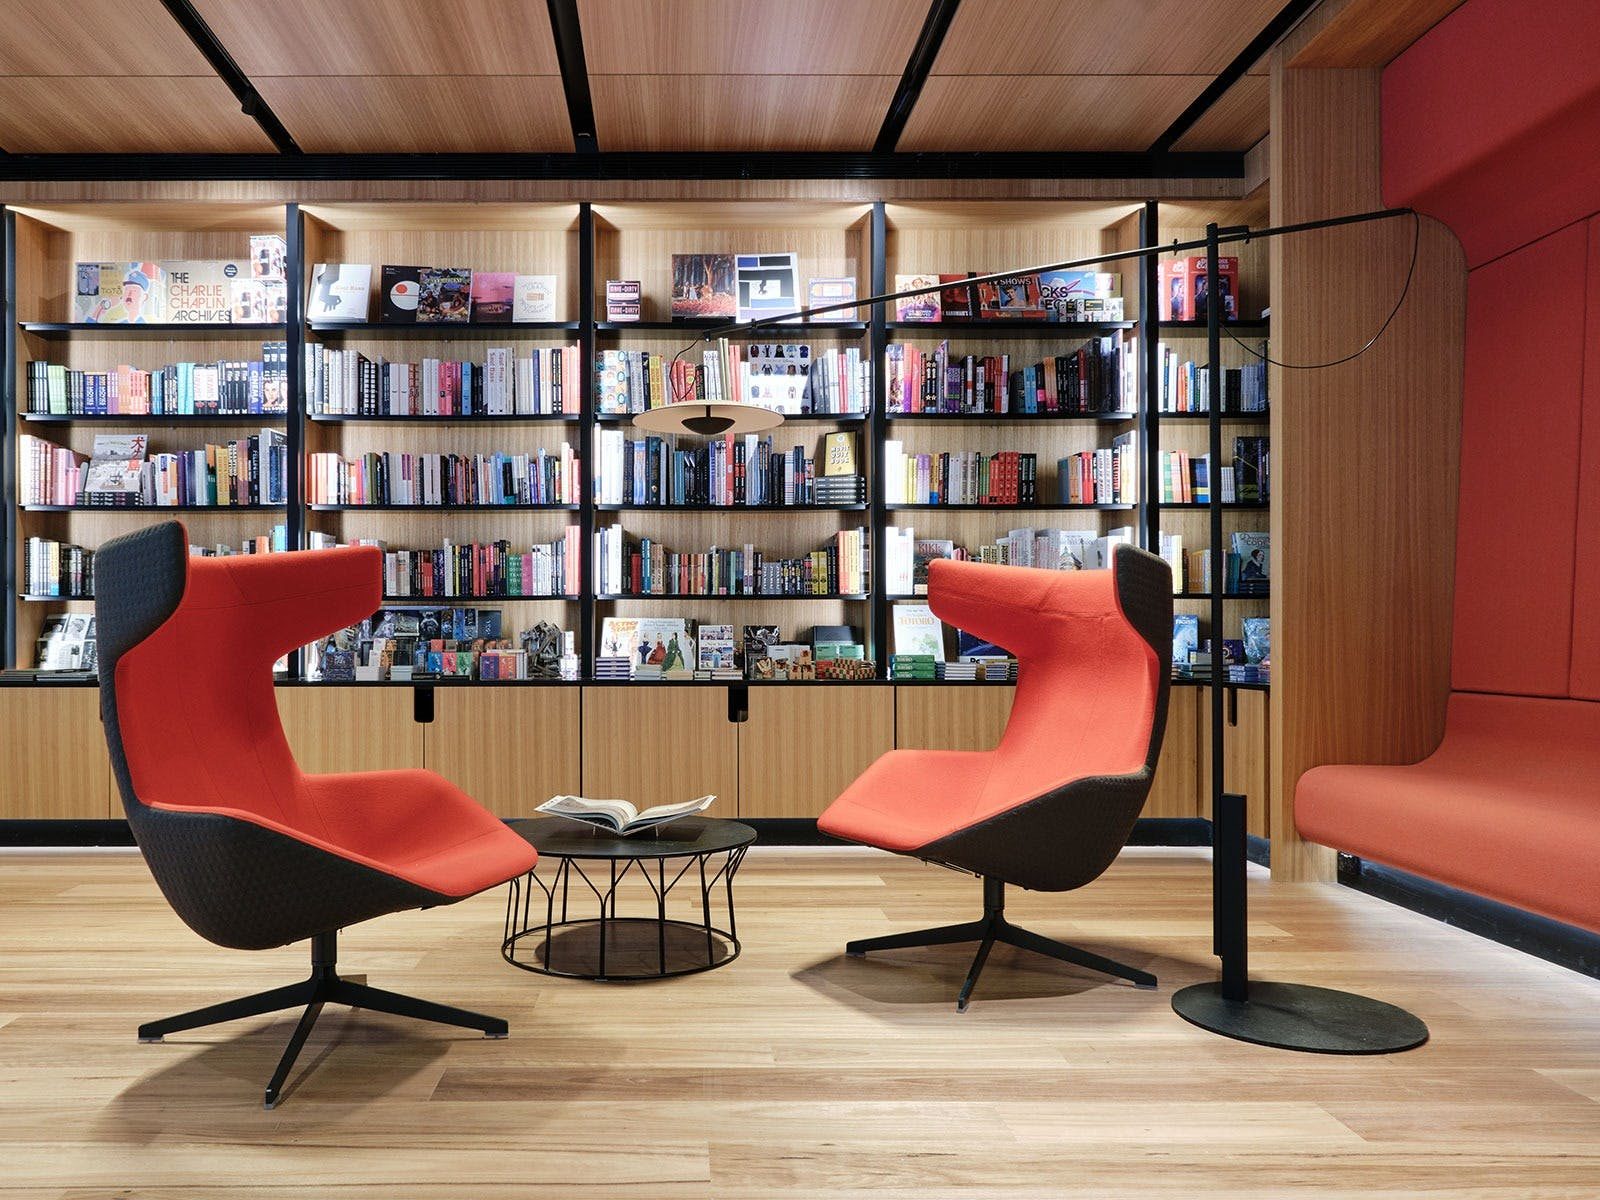 Two red chairs in front of a bookshelf